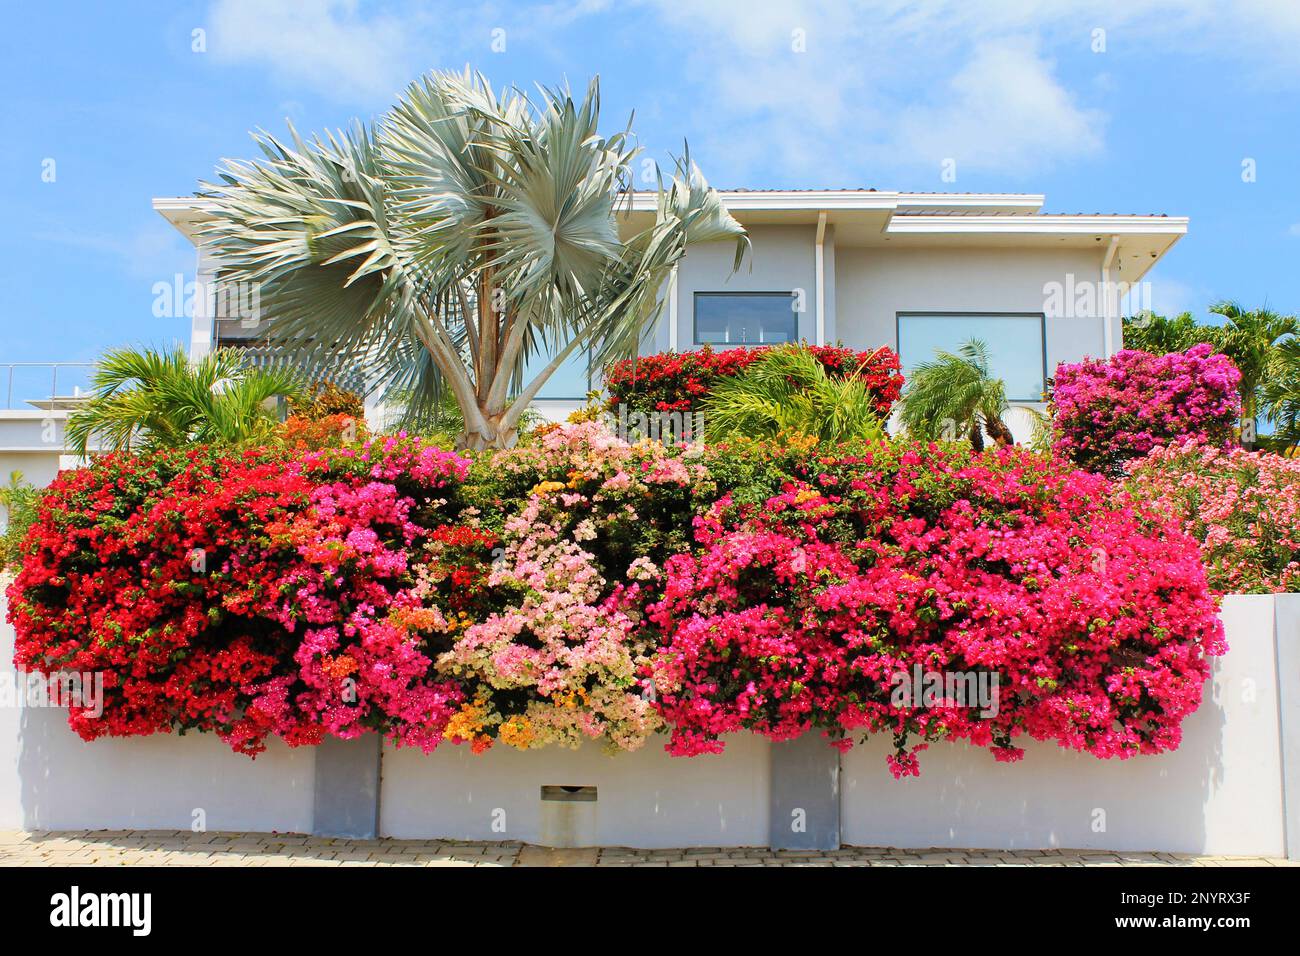 Noord, Aruba - March 10, 2022. House with front yard filled with beautiful tropical flowers and palm trees. Stock Photo